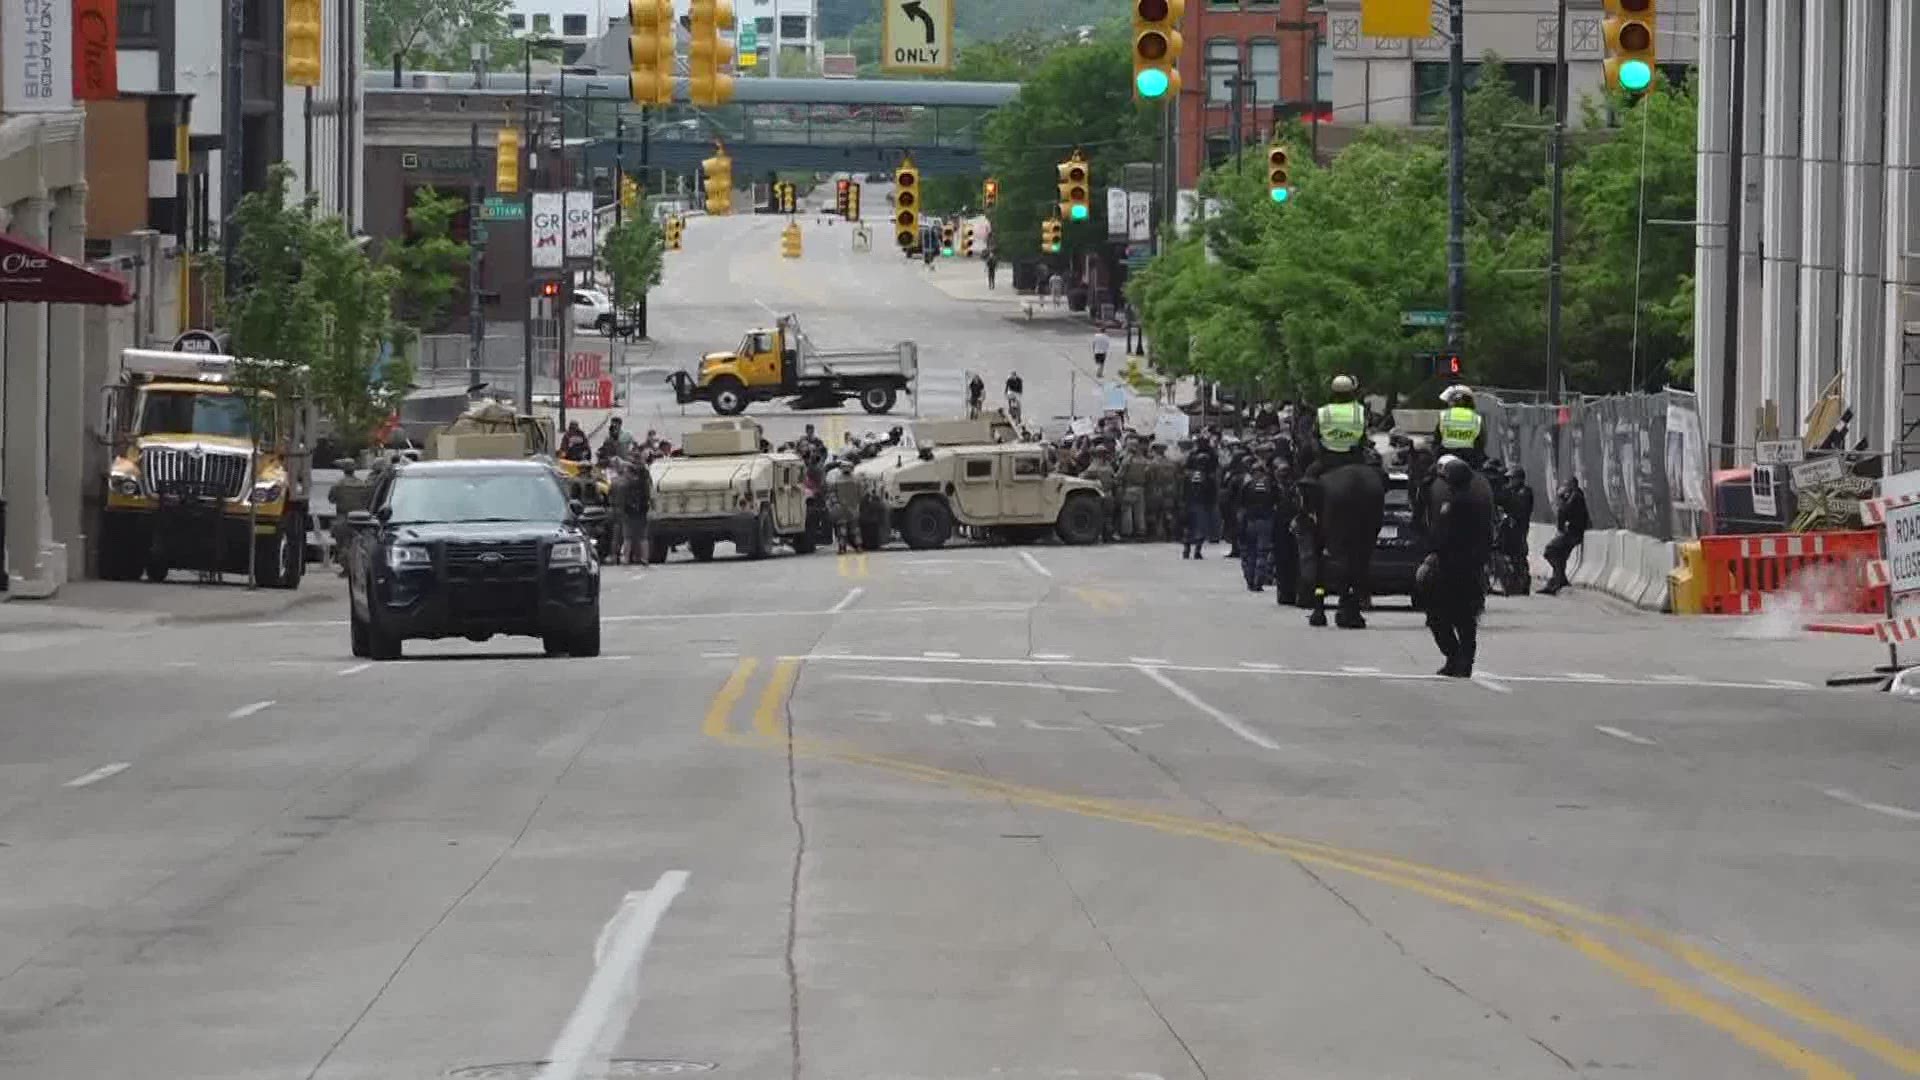 A protest in Grand Rapids came to a sudden end when police enforced a 7 p.m. curfew.